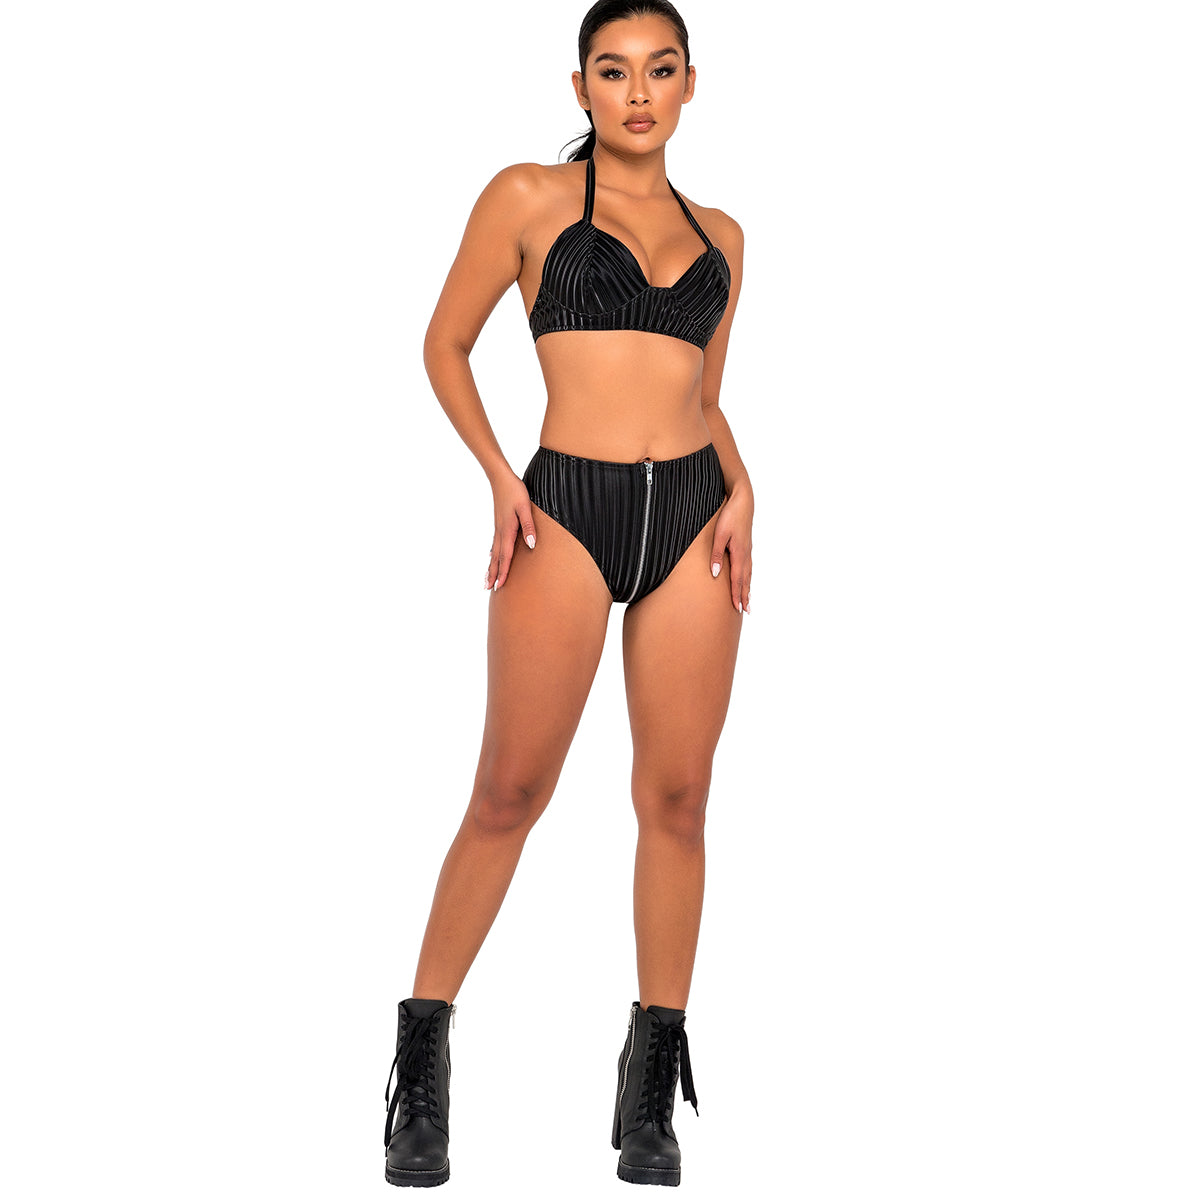 High-waisted zip up shorts 6125 front view shown with top 6124